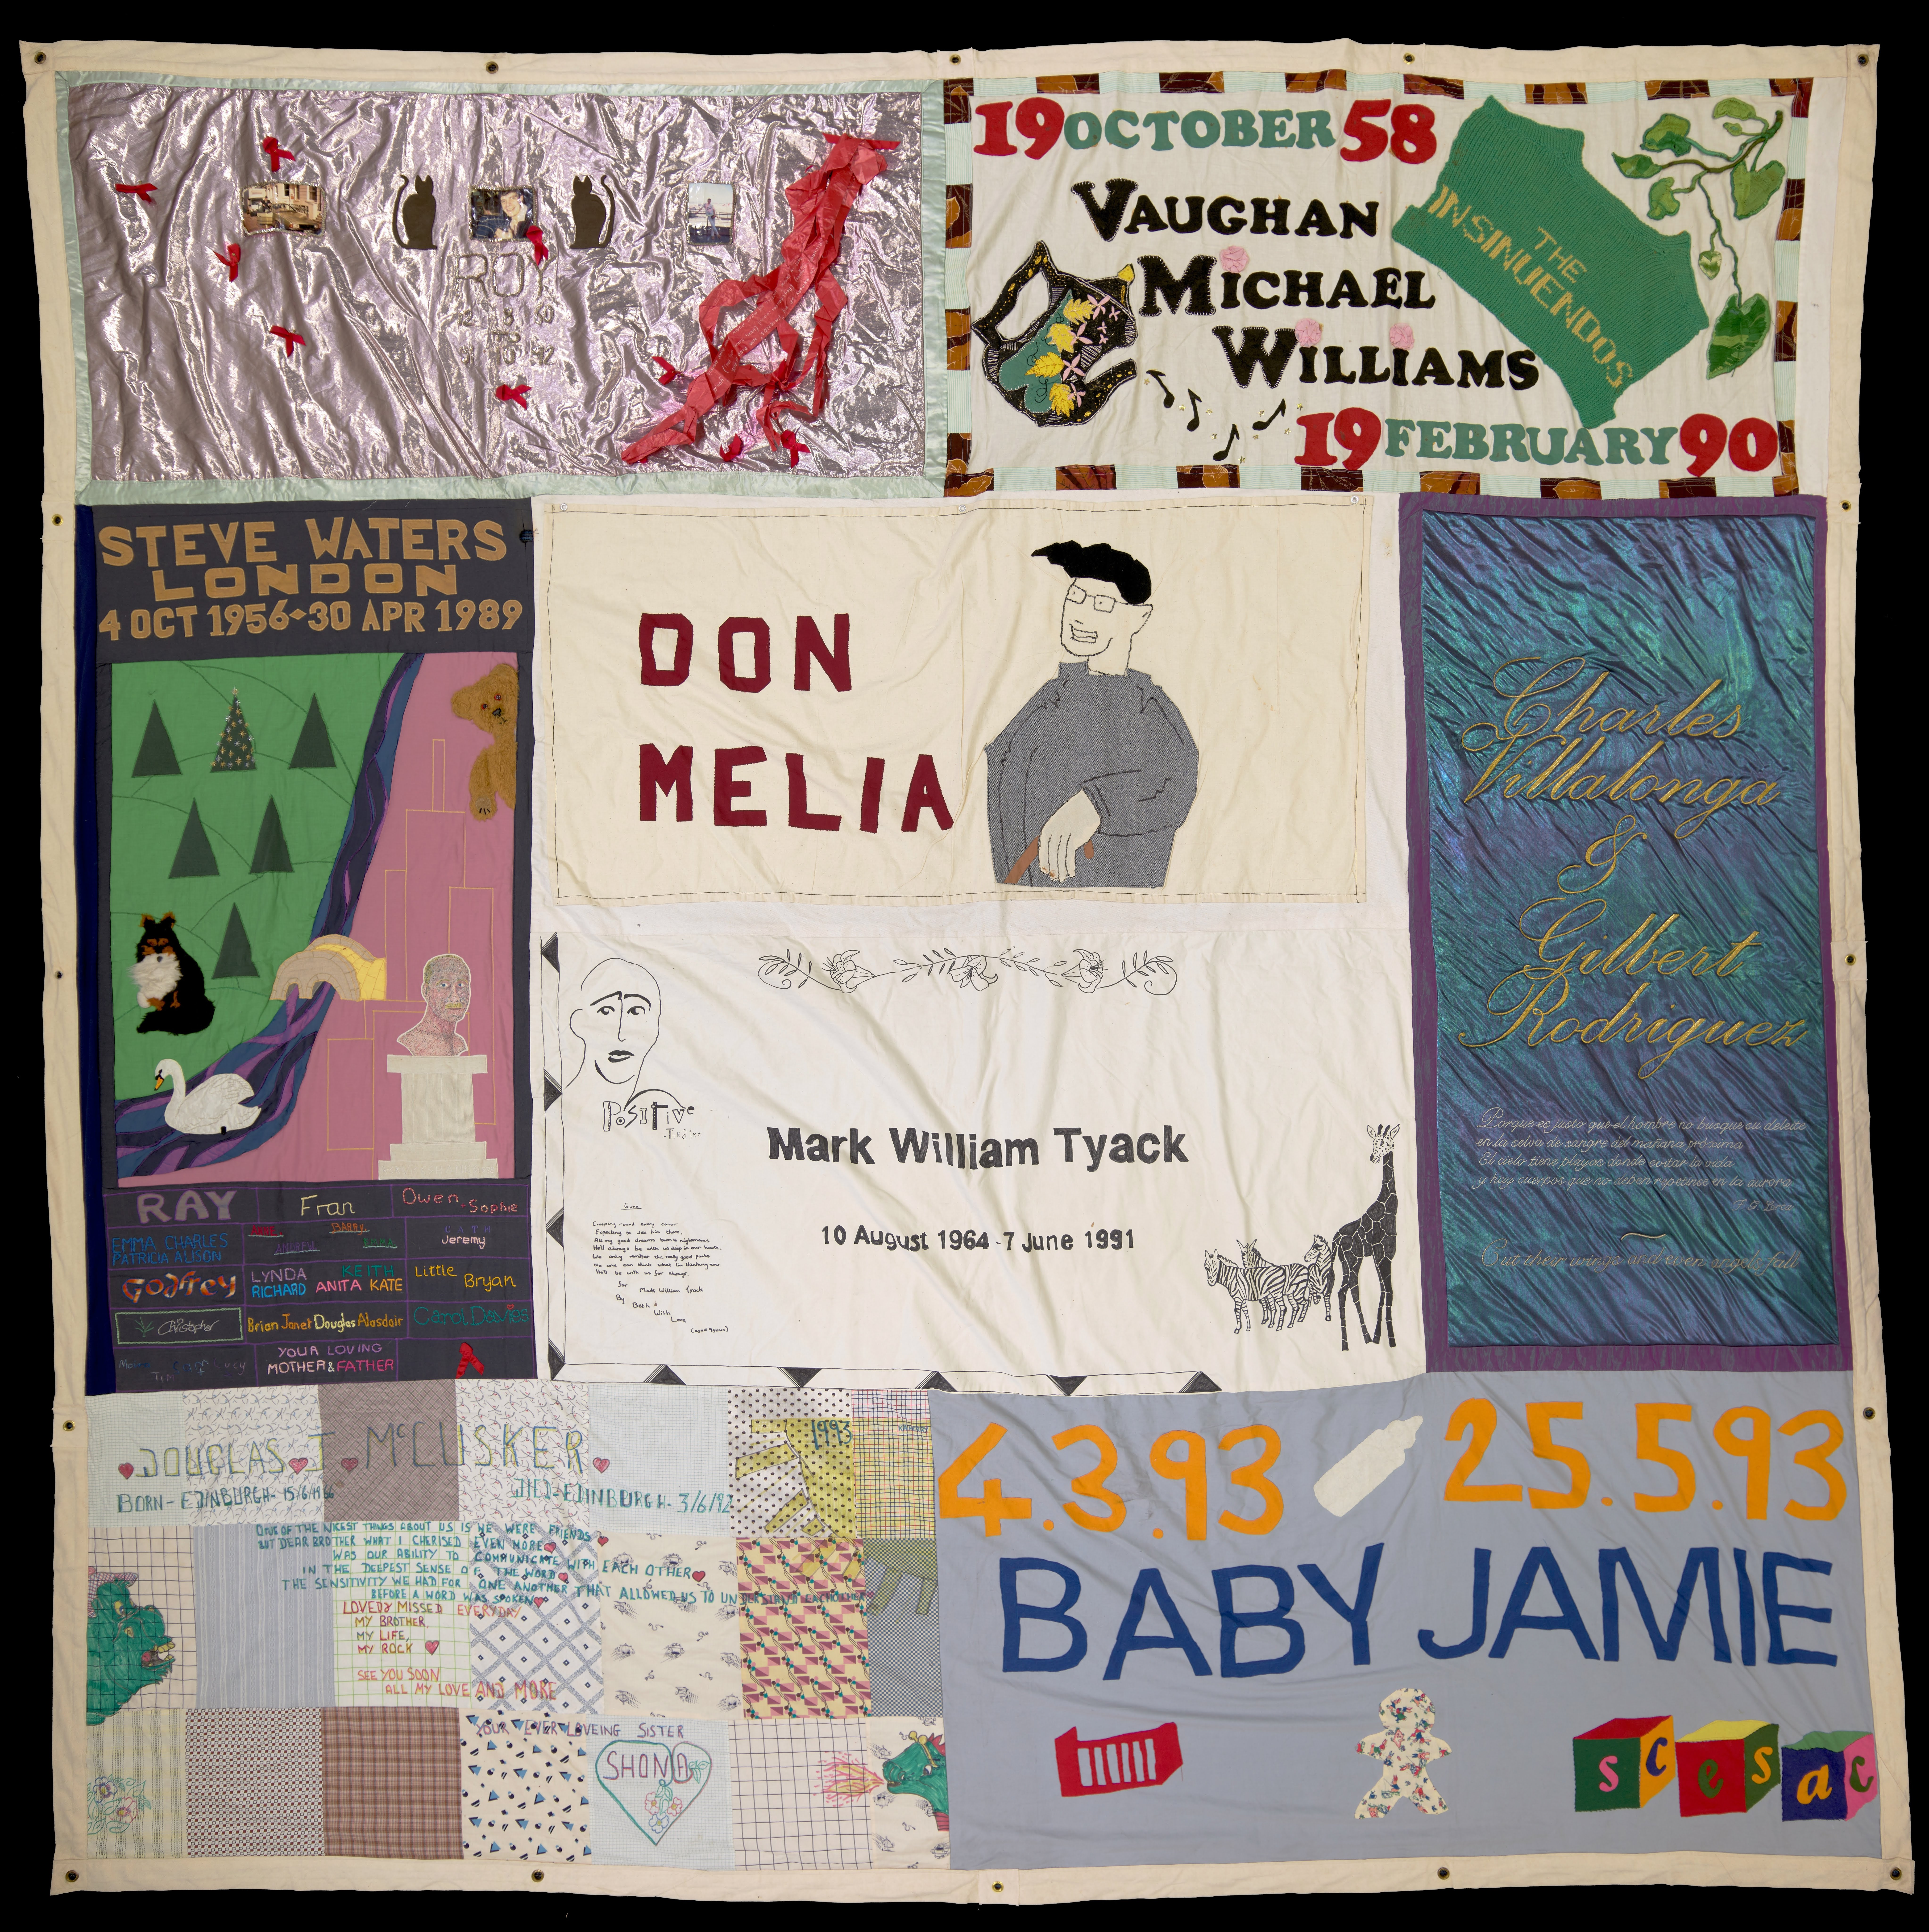 The Vaughan Michael Williams quilt, part of the UK Aids Memorial Quilt